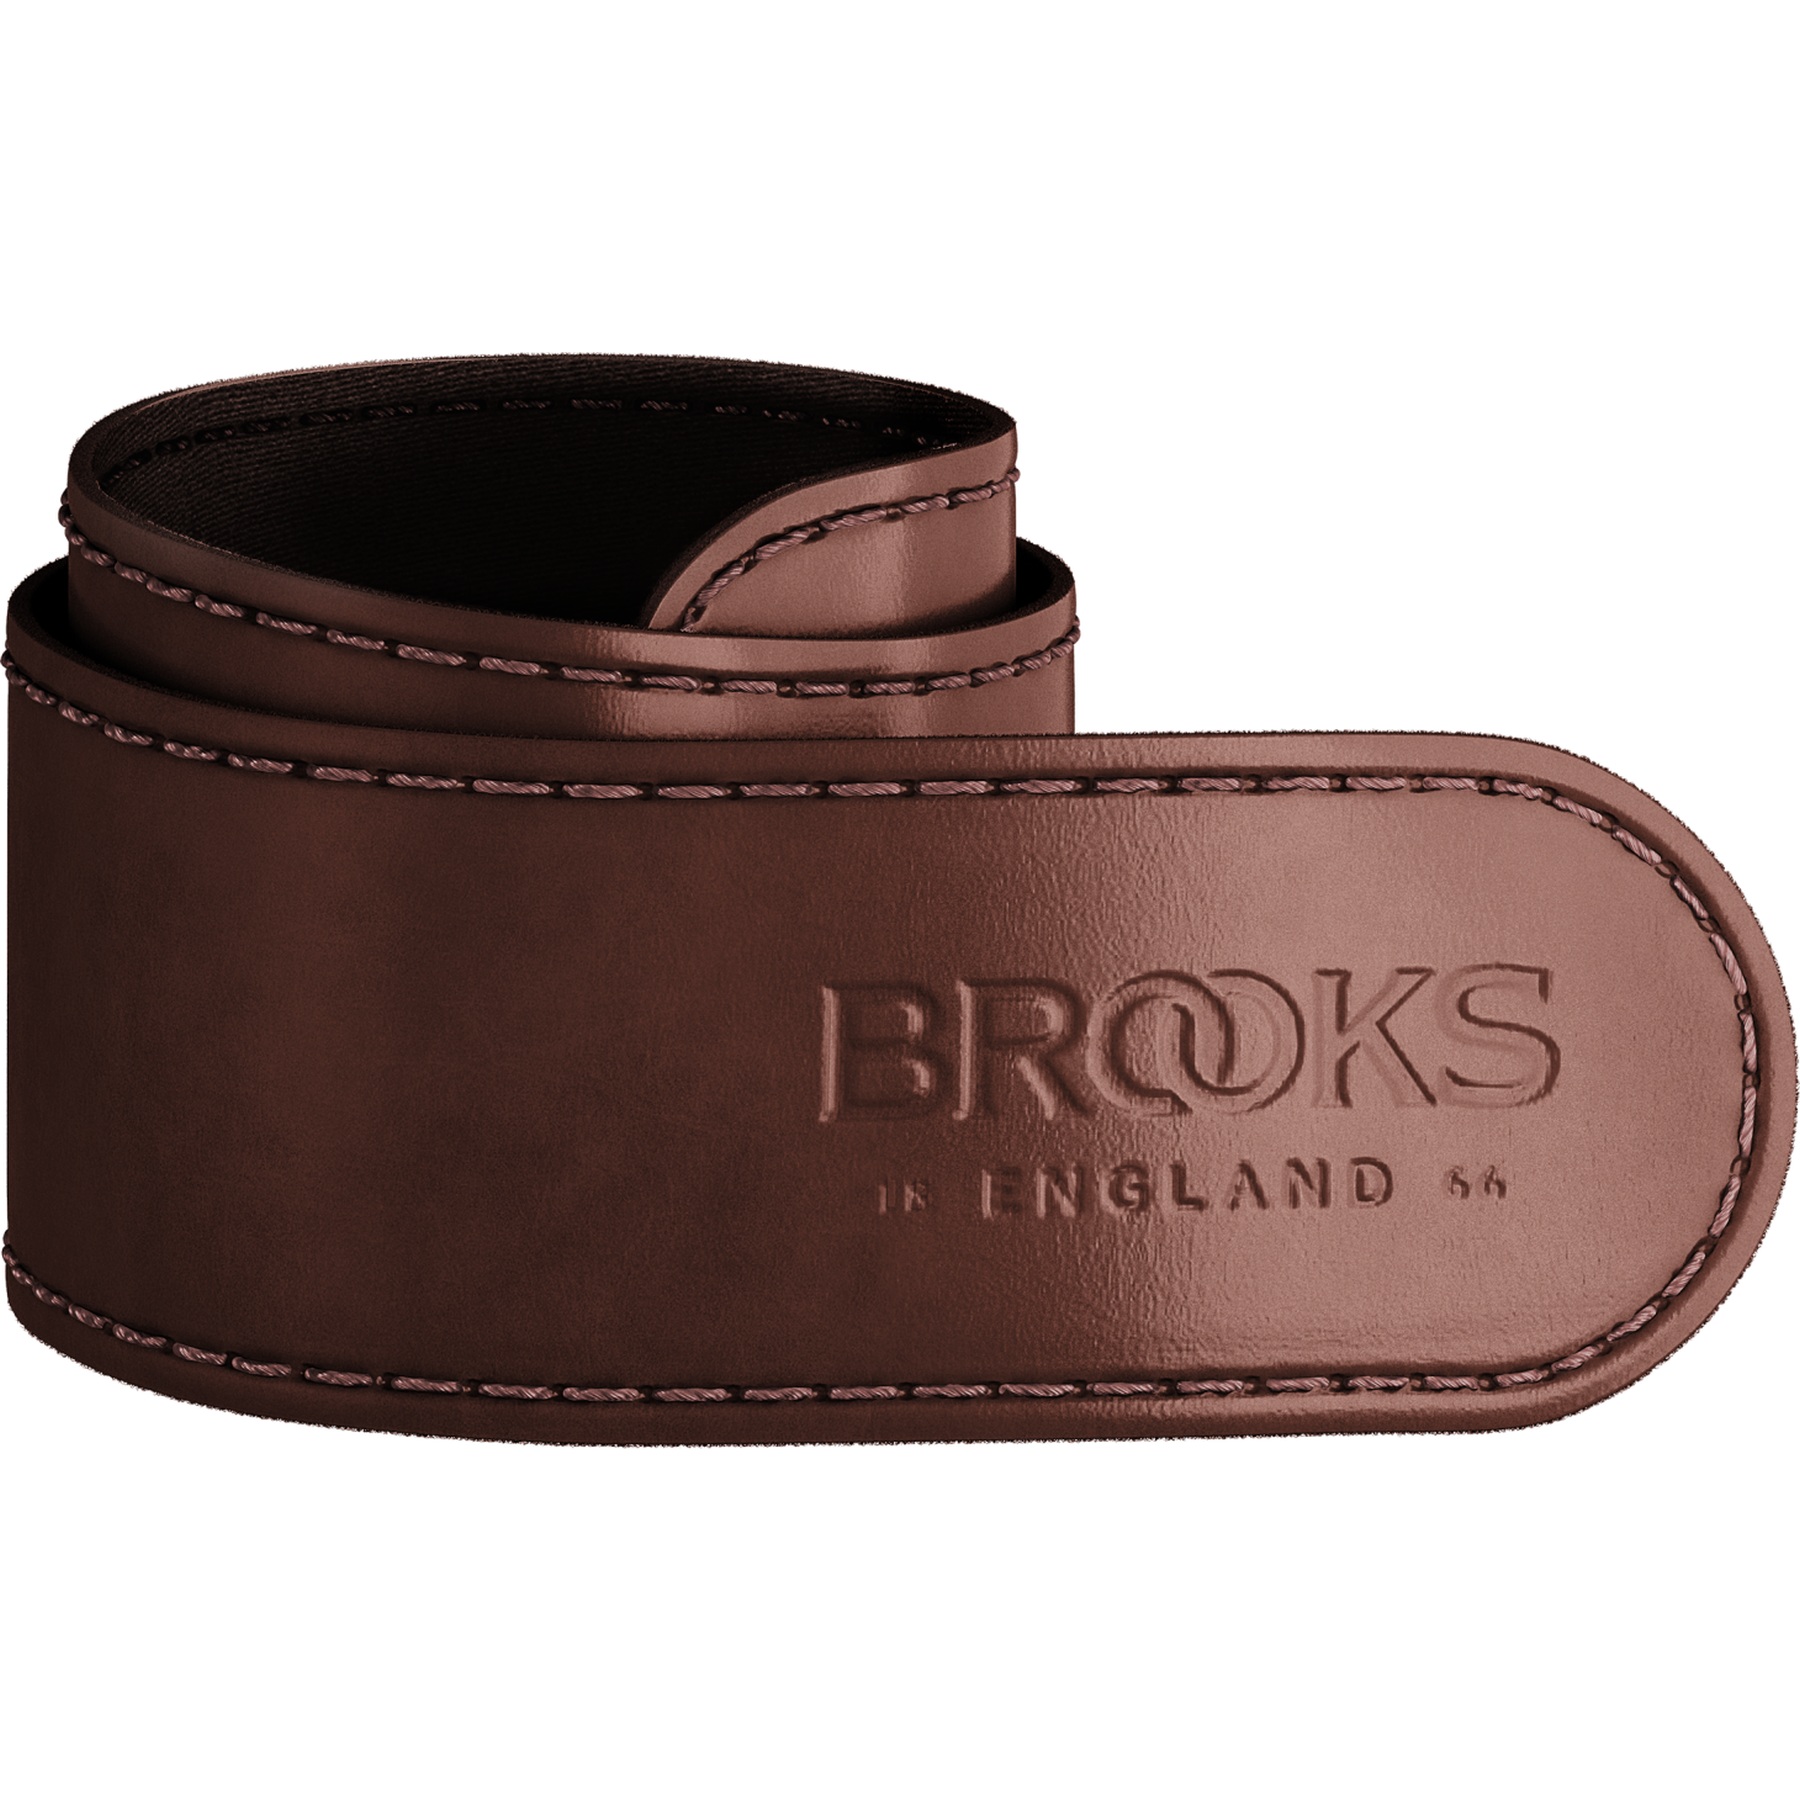 Picture of Brooks Trouser Strap - Brown